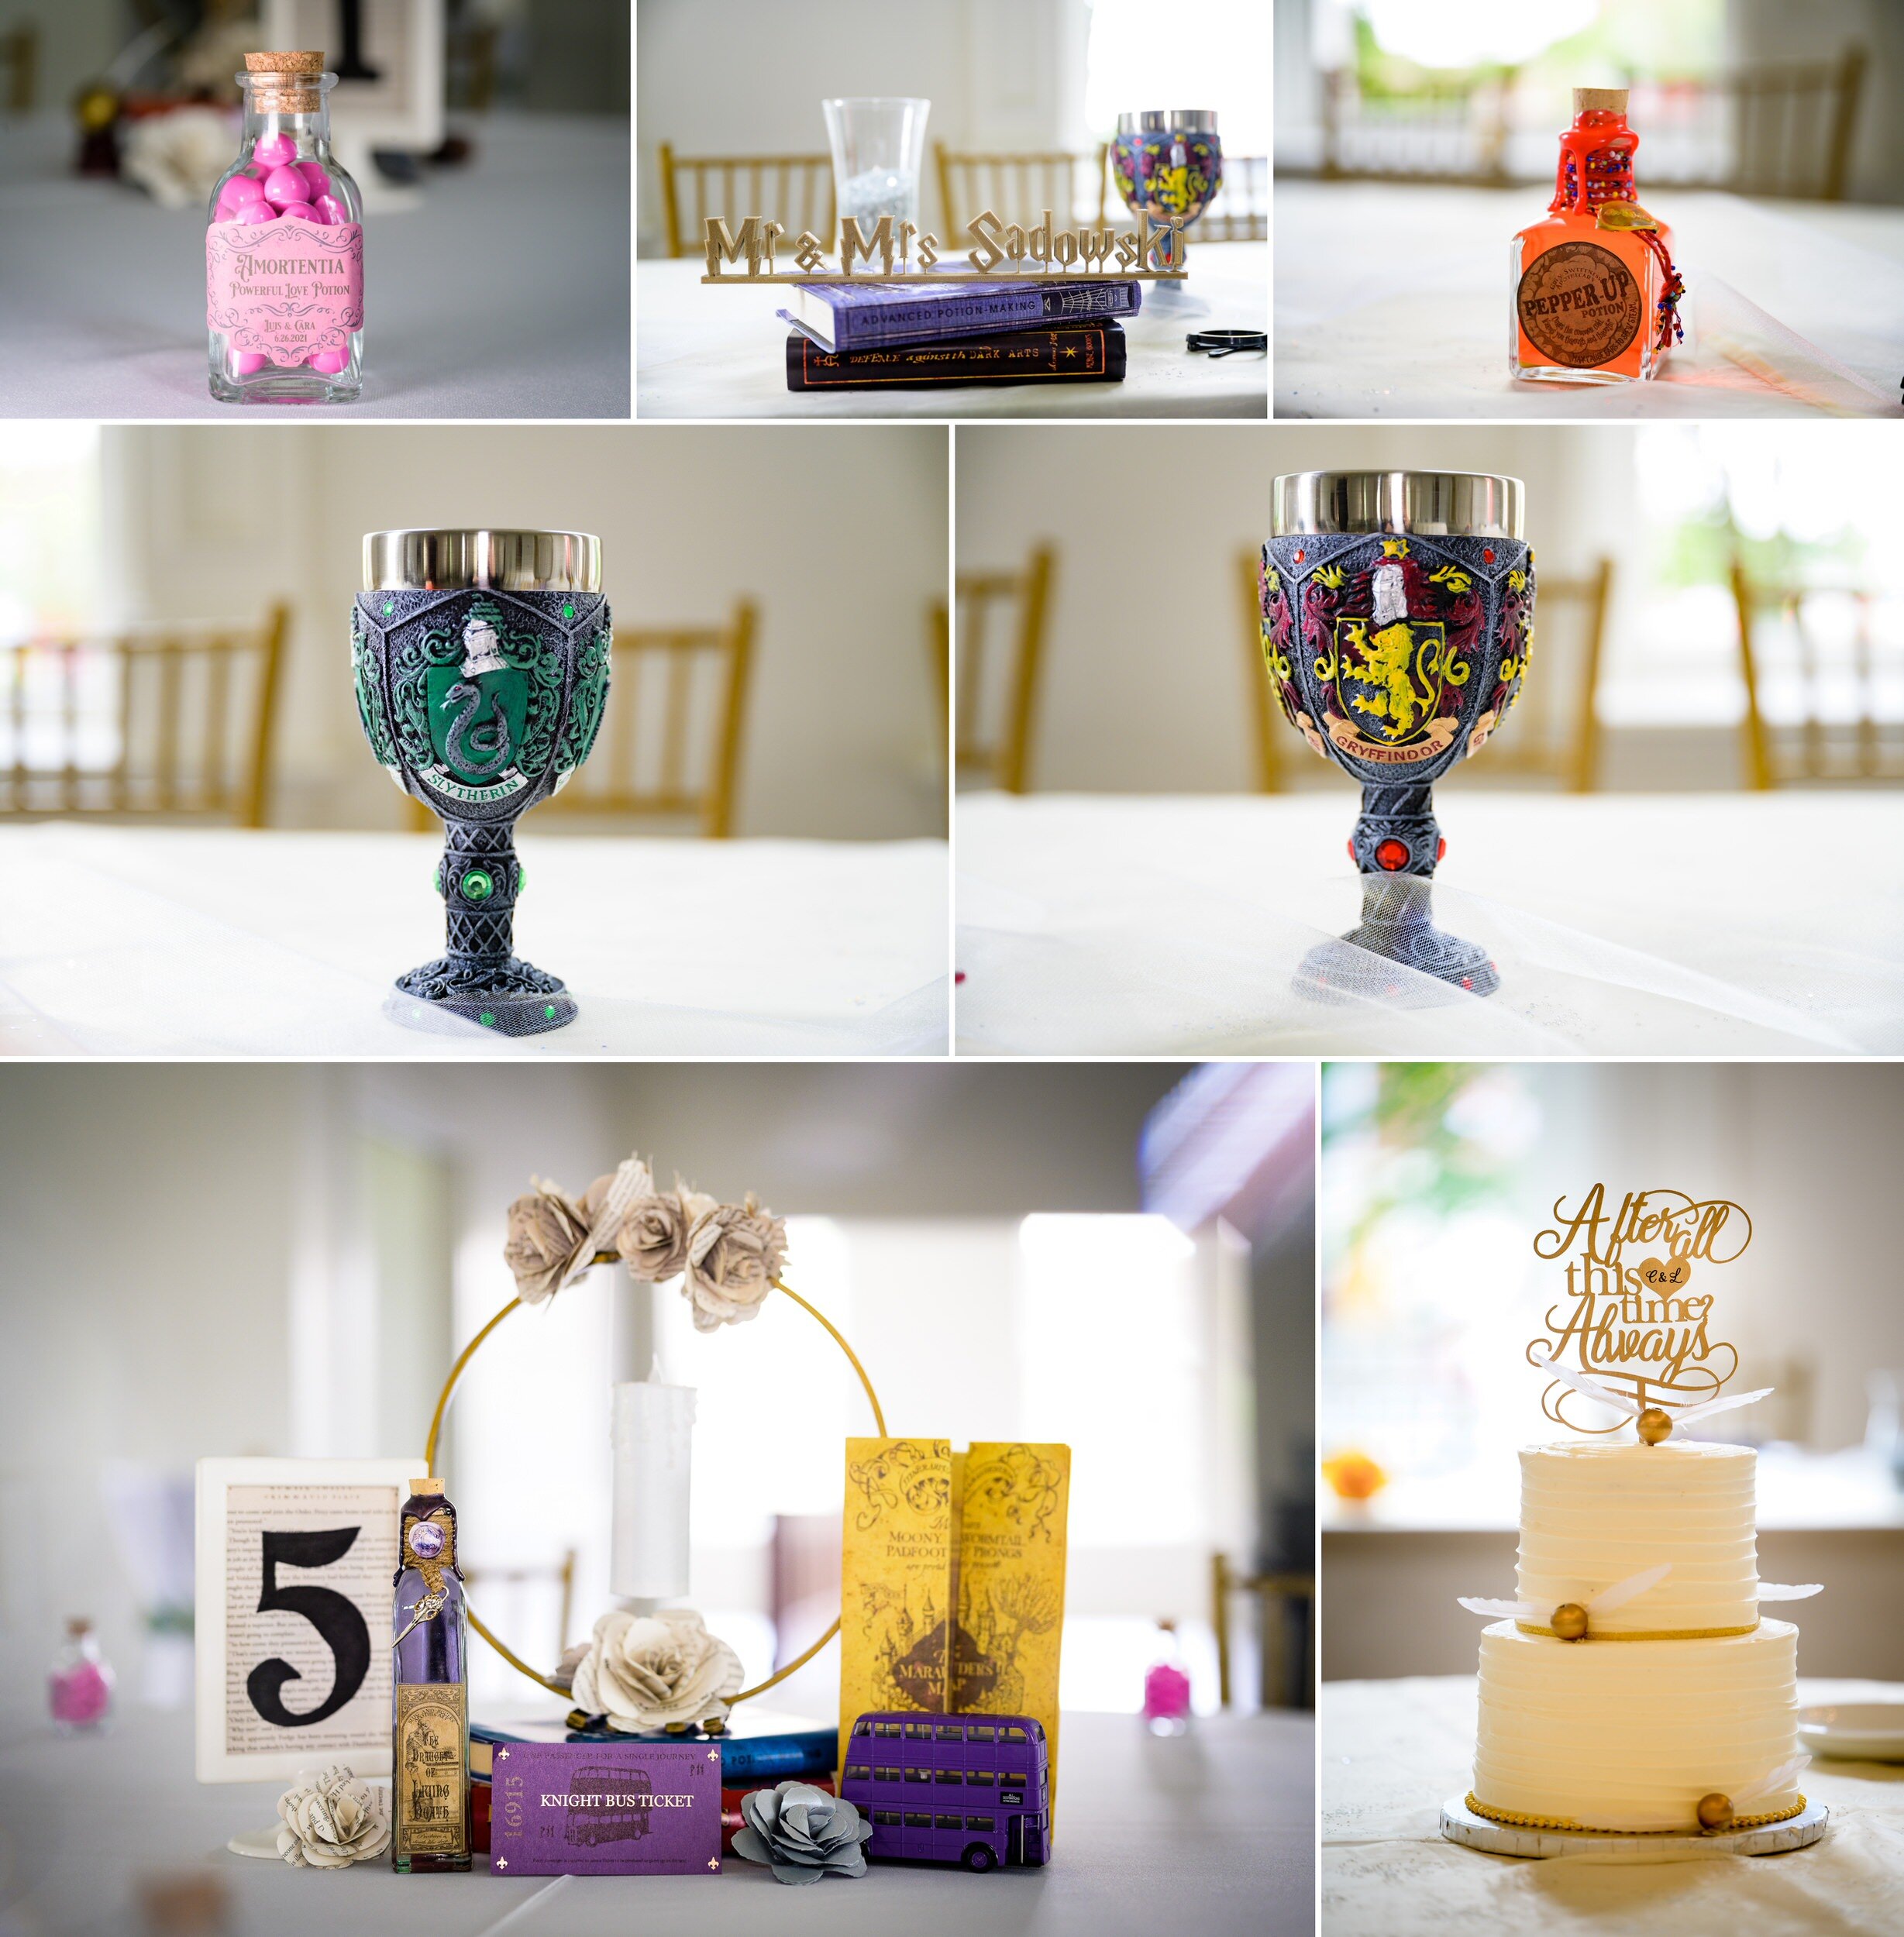 Harry Potter themed wedding reception at the Reef Restaurant in Long Be…   Harry potter wedding theme receptions, Harry potter wedding, Harry potter  birthday favors